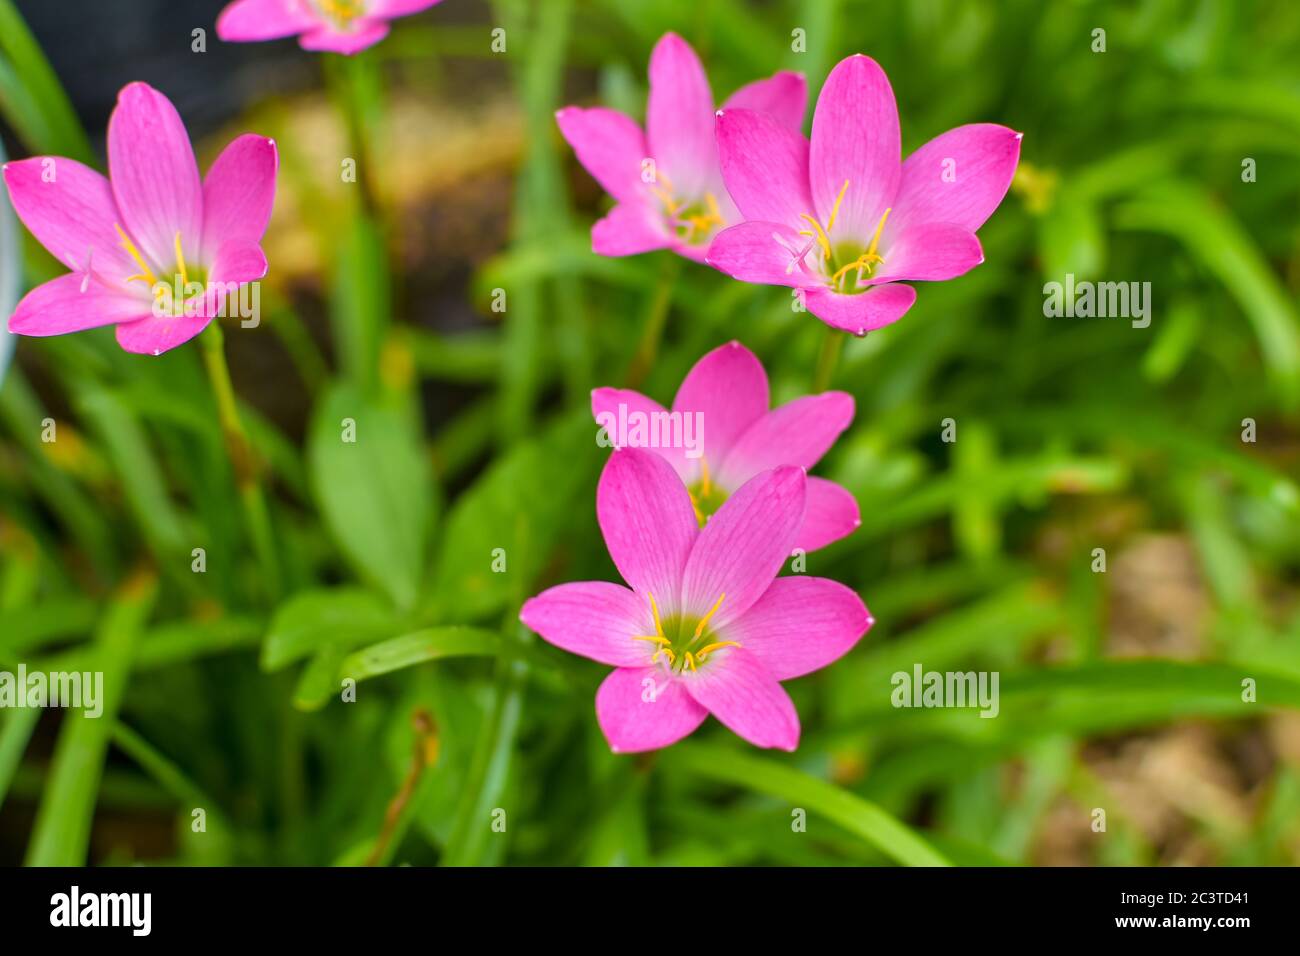 Zephyranthes rosea, commonly known as the Cuban zephyrlily, rosy rain lily, rose fairy lily, rose zephyr lily or the pink rain lily. They are cultivat Stock Photo